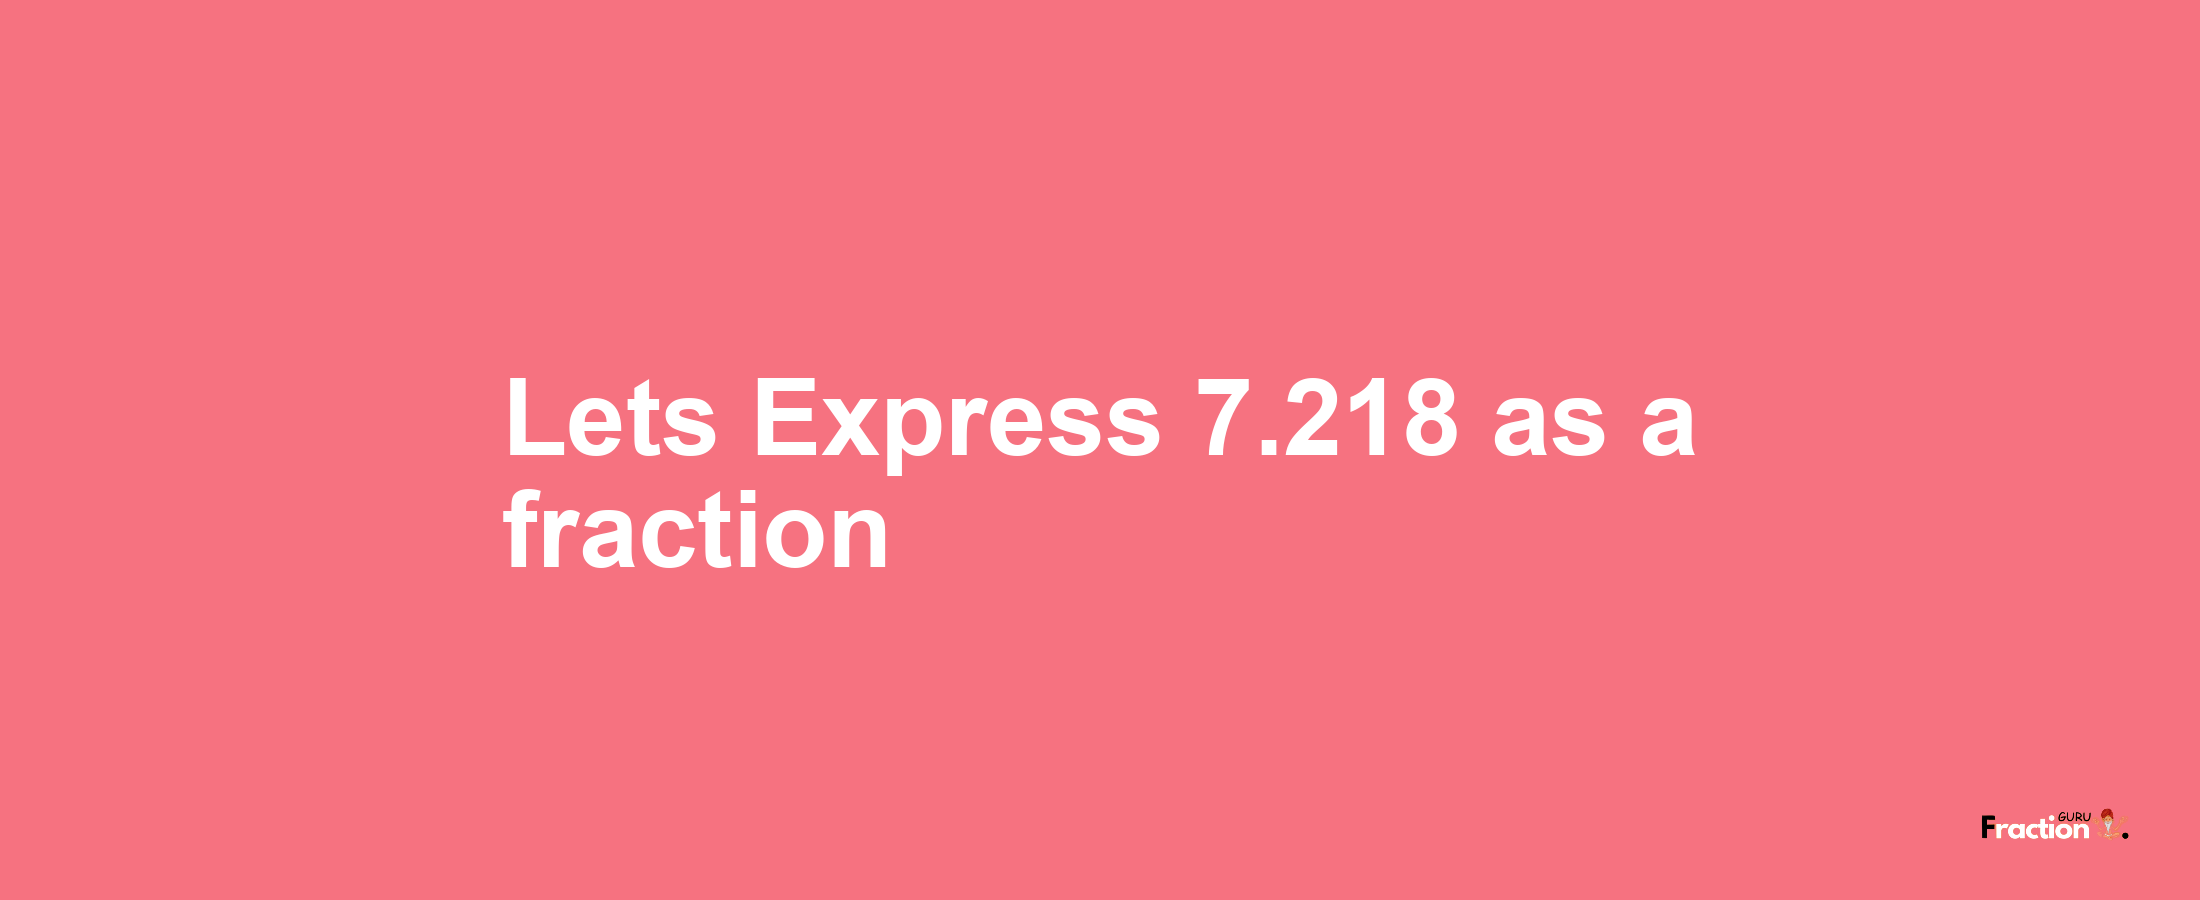 Lets Express 7.218 as afraction